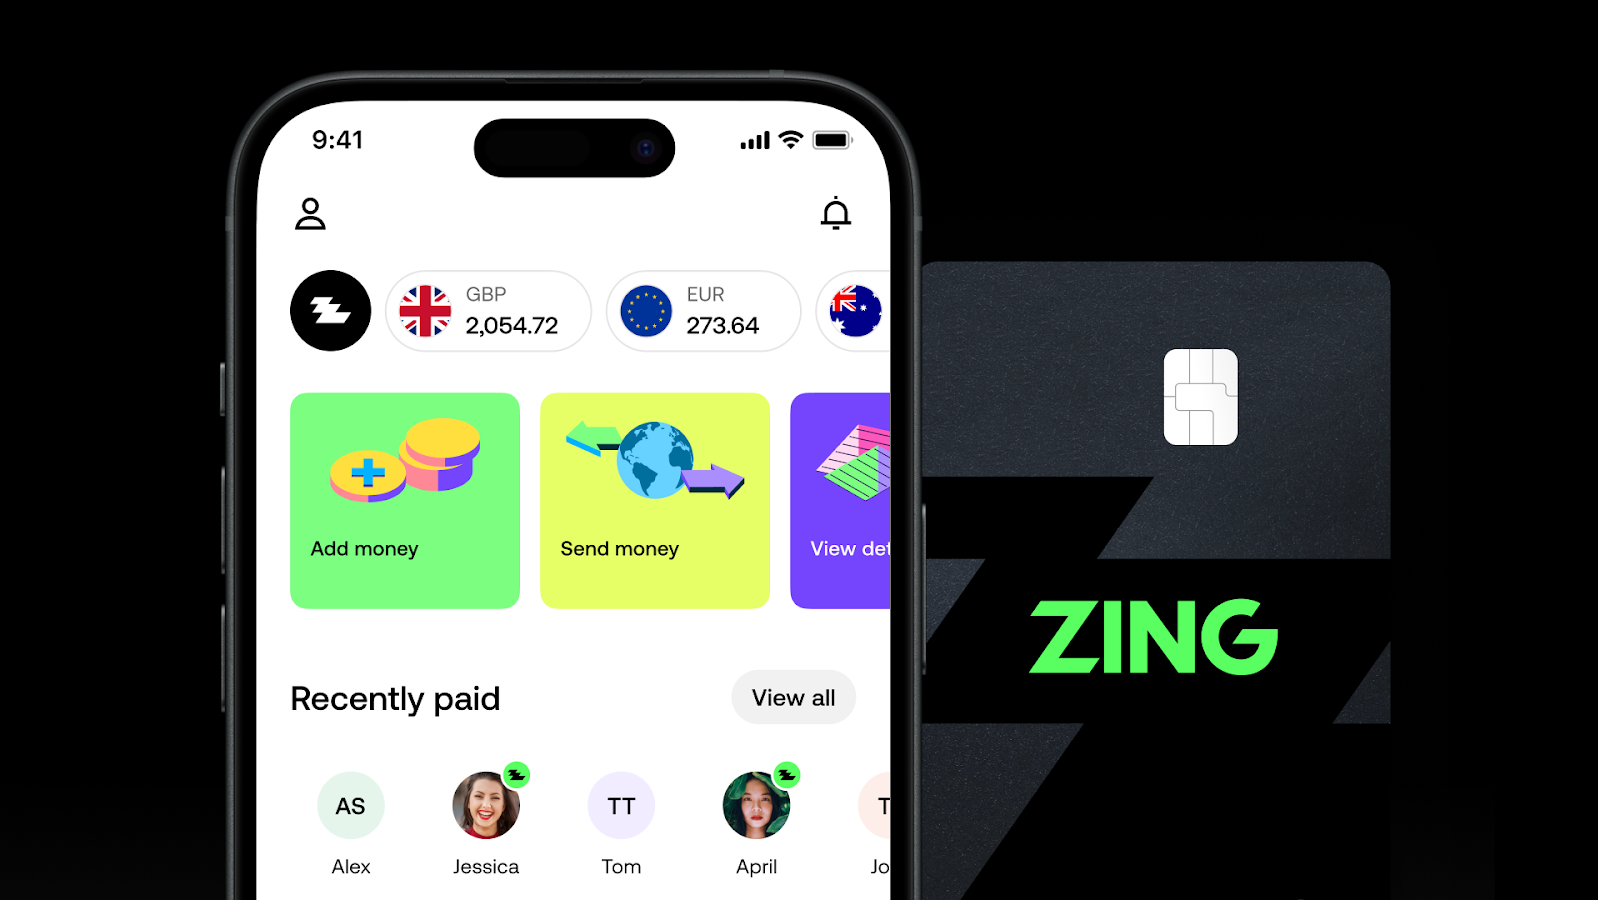 HSBC goes after Revolut and Wise with new fintech FX app Zing - AltFi